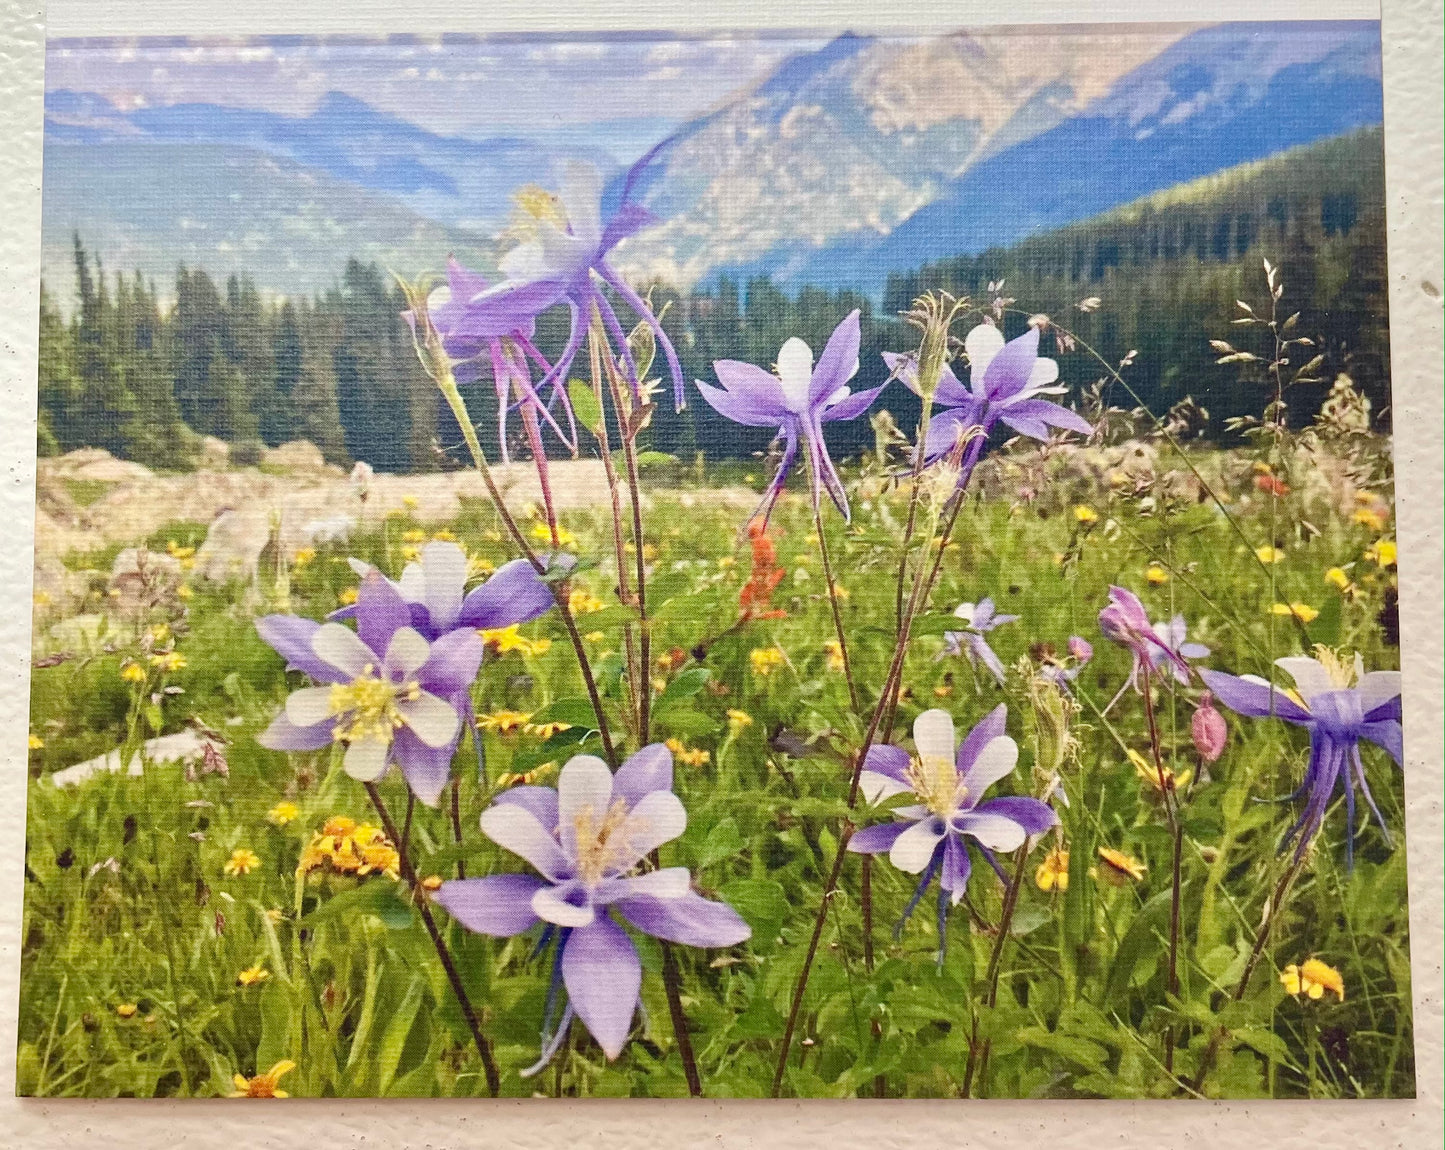 Set of 6 Colorado Columbines Boxed Original Photography Greeting Cards with White Envelopes